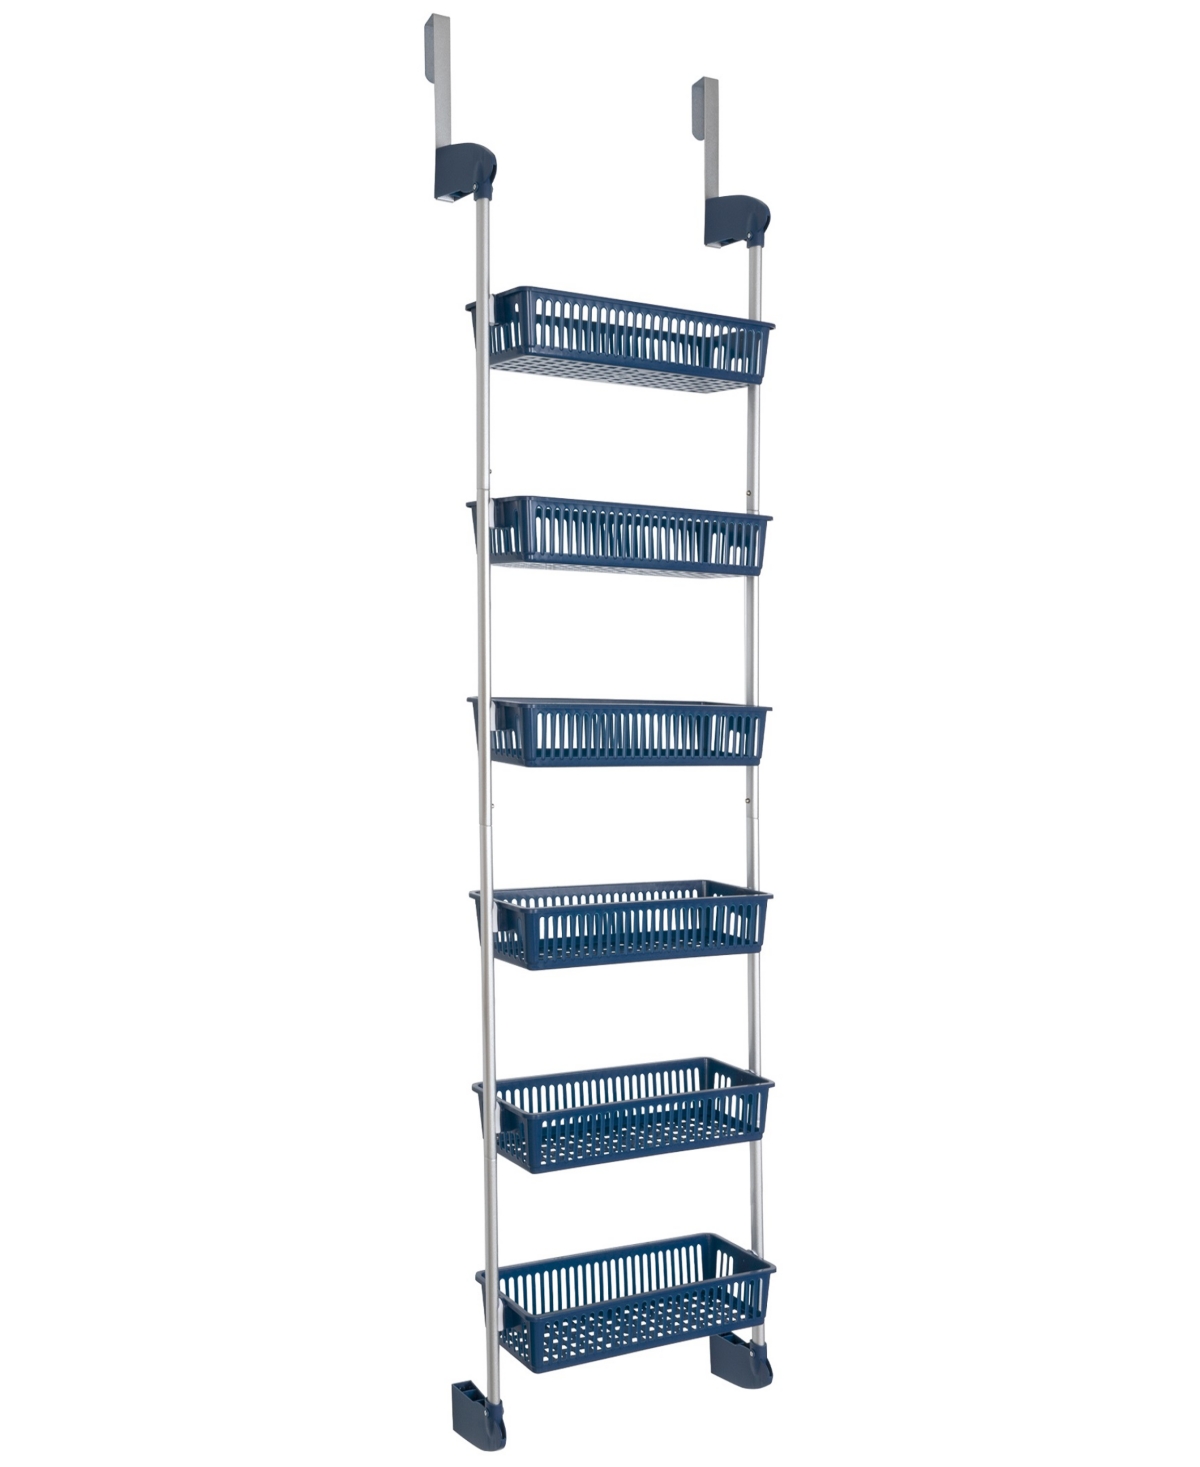 6-Tier Over-the-Door Hanging Pantry Organizer with Full Baskets - Blue